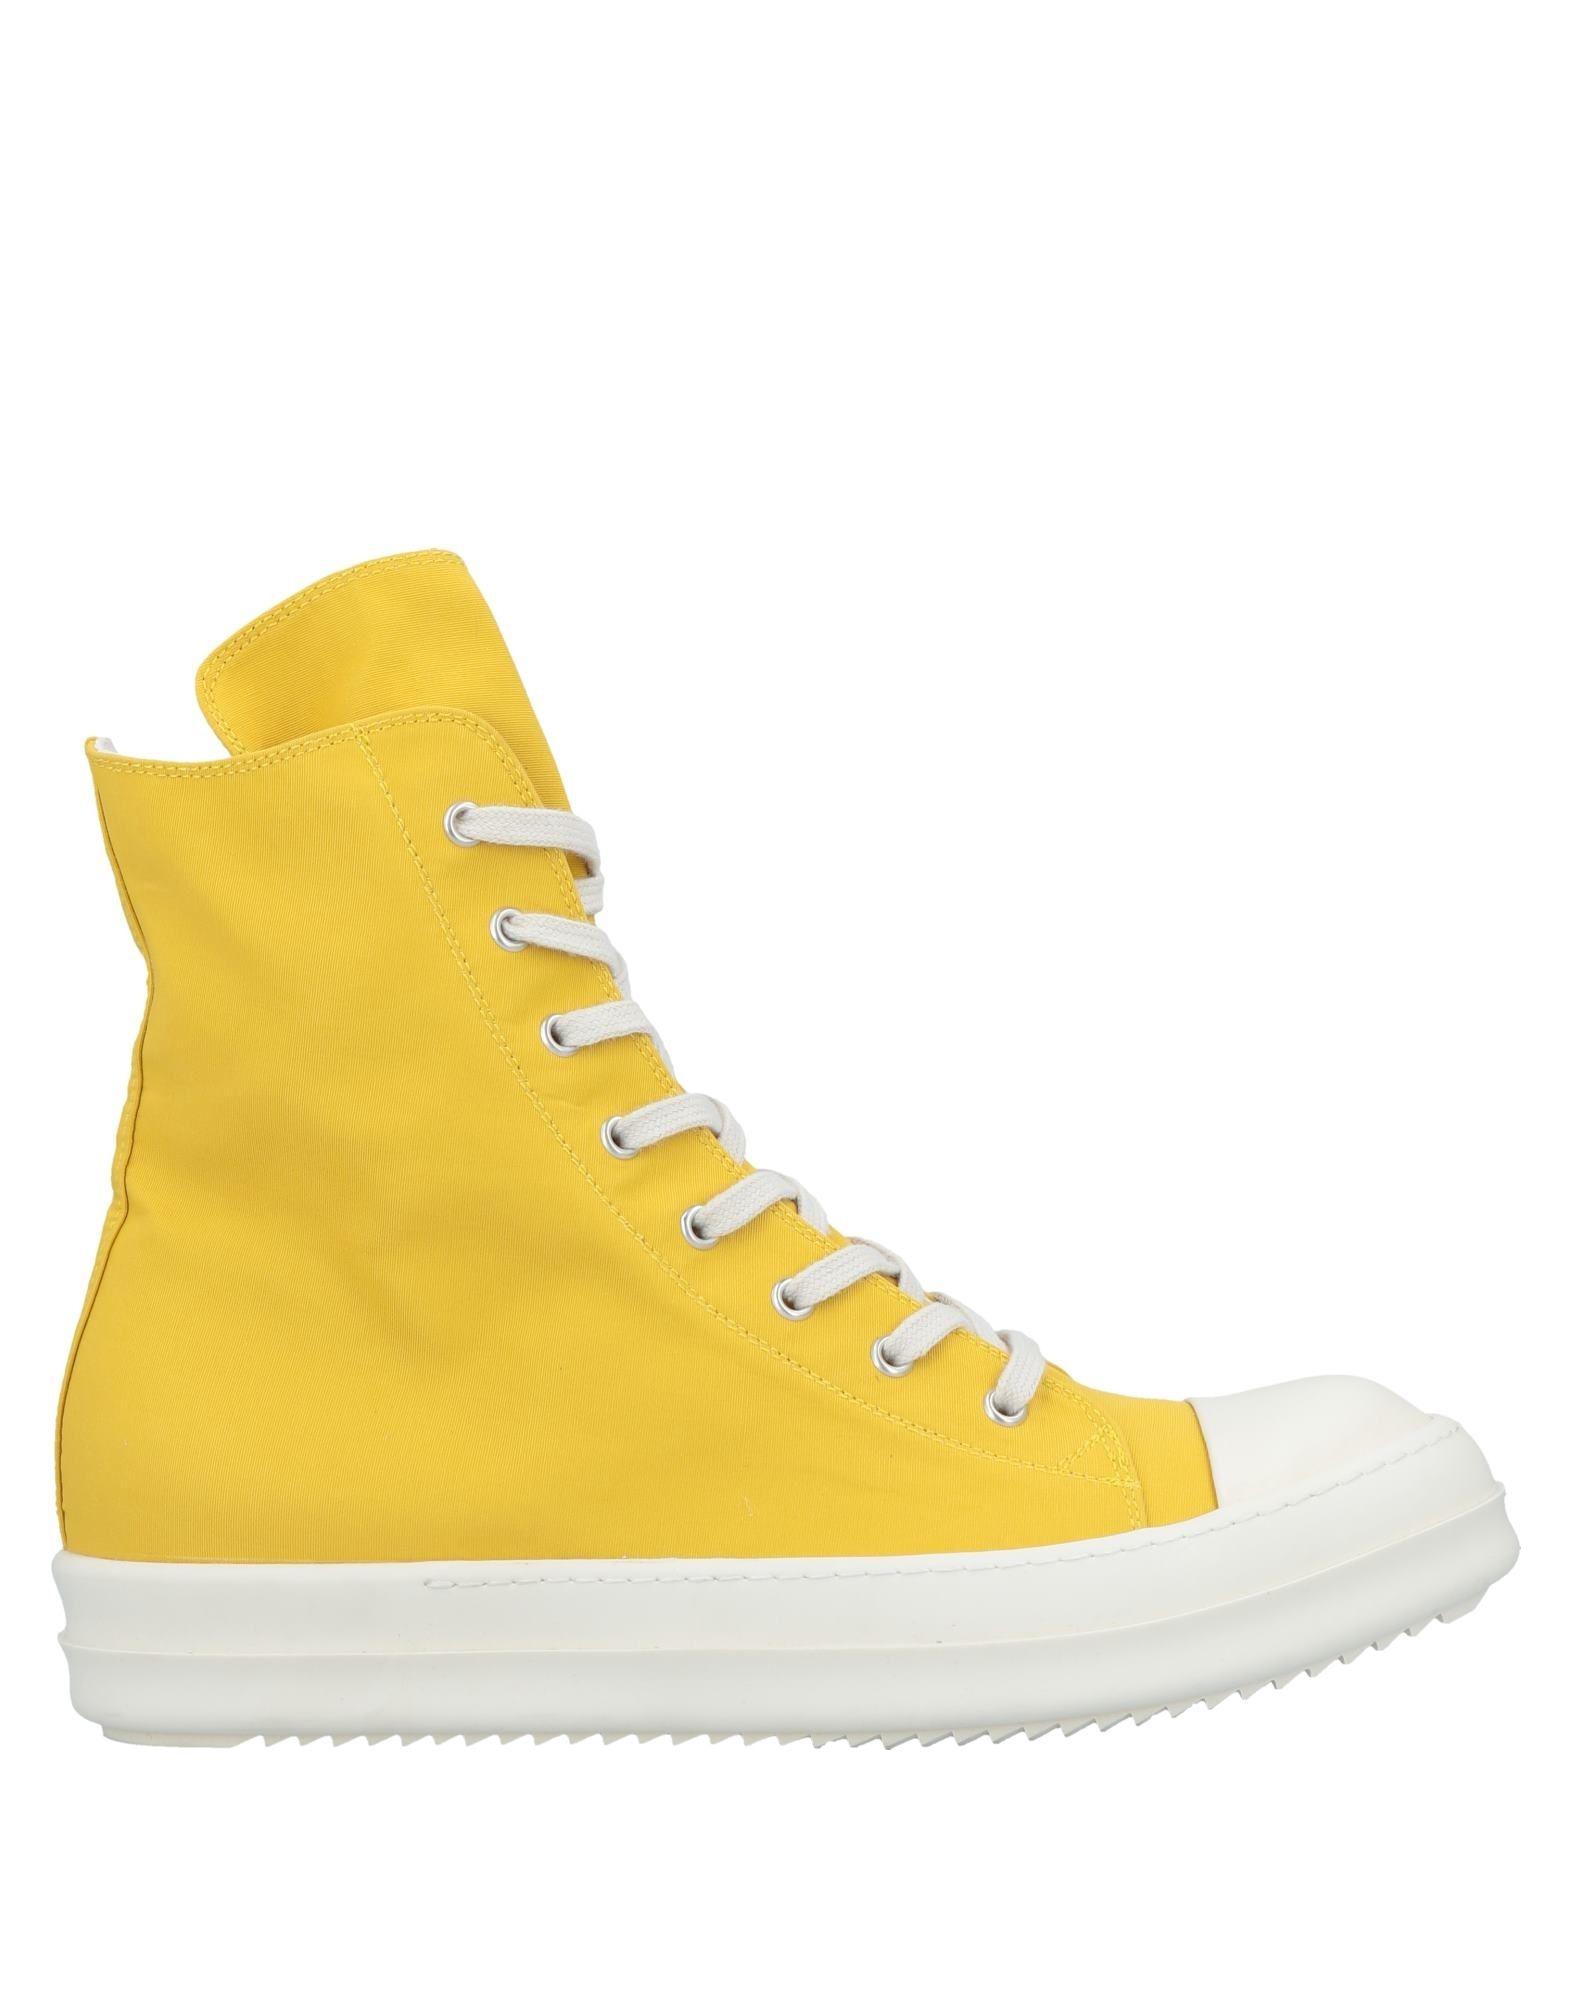 Rick Owens Drkshdw Rubber High-tops & Sneakers in Yellow for Men - Lyst